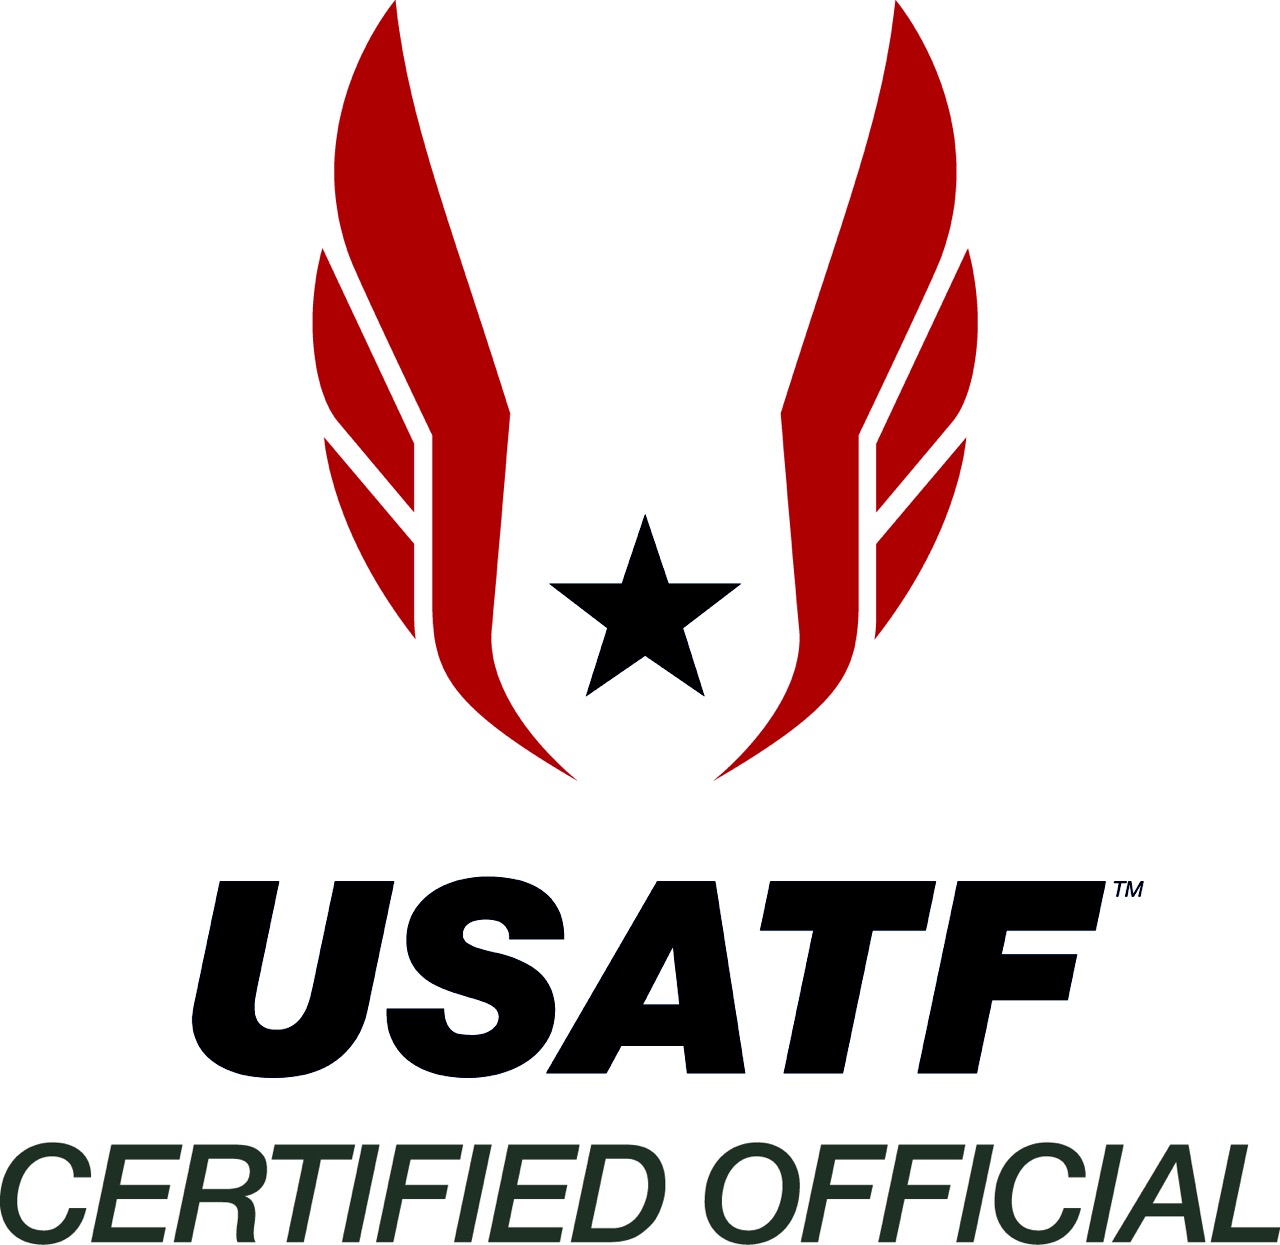 USATF Certified Official logo